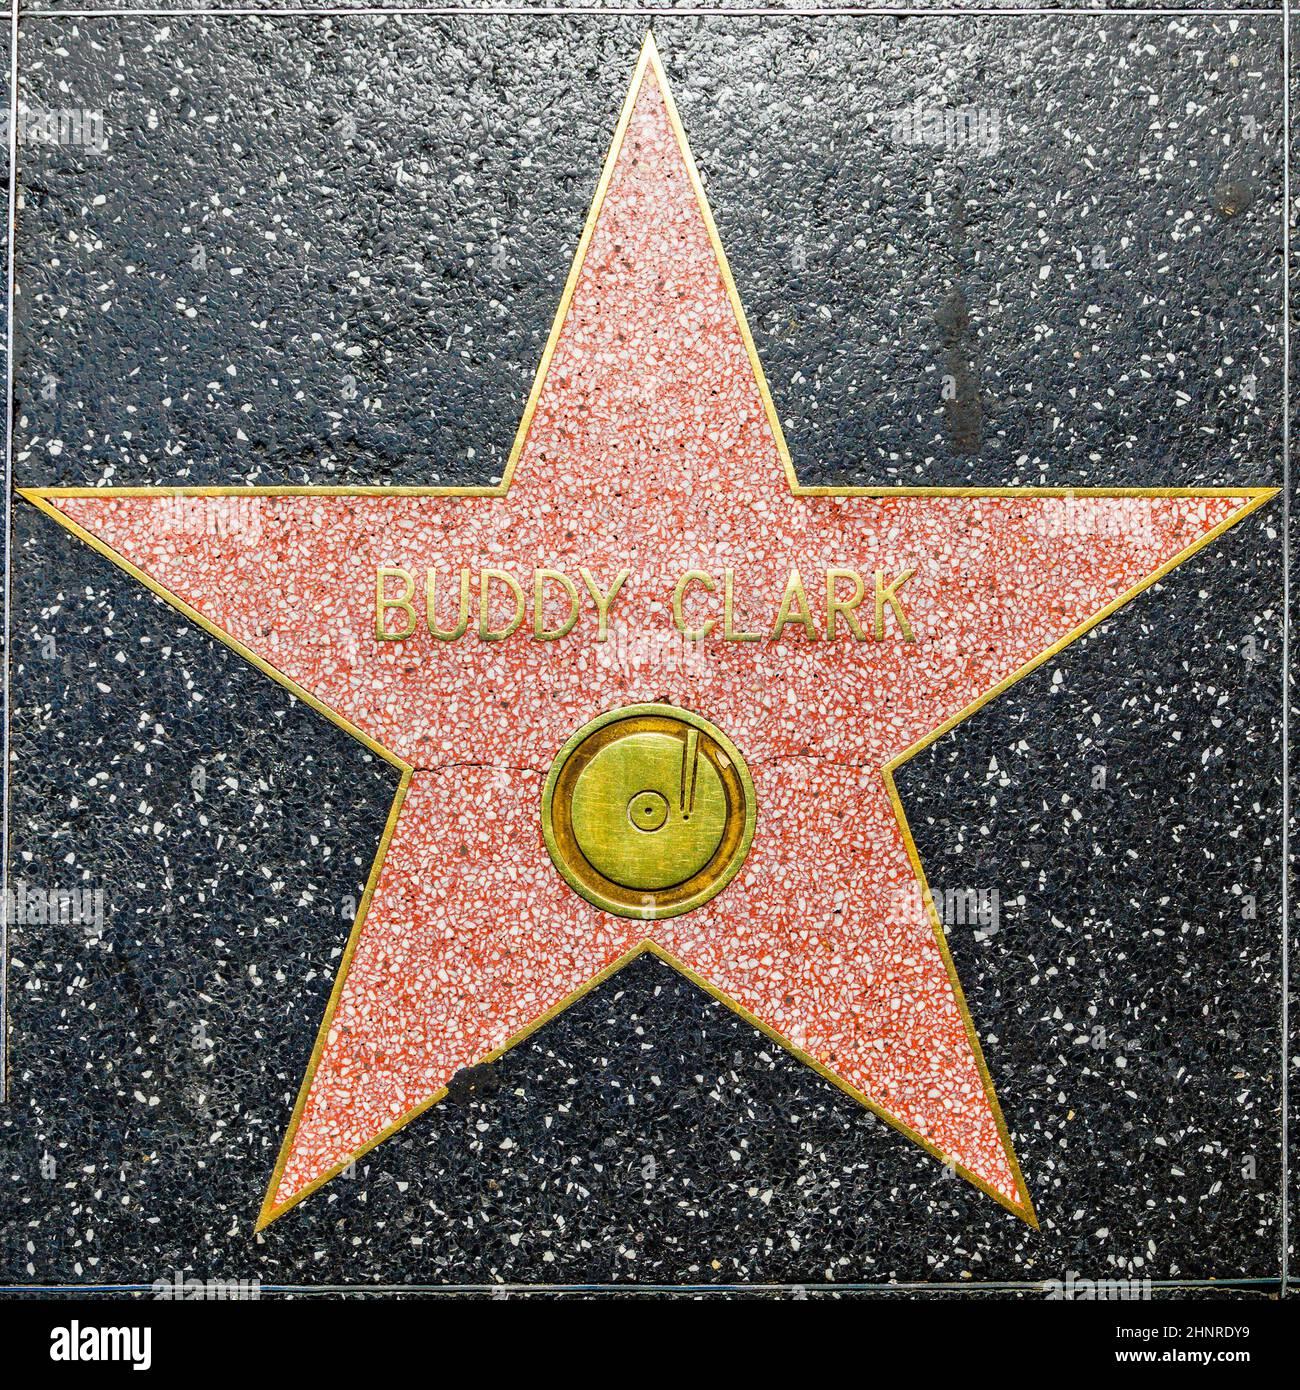 Buddy Clark's star on Hollywood Walk of Fame Stock Photo